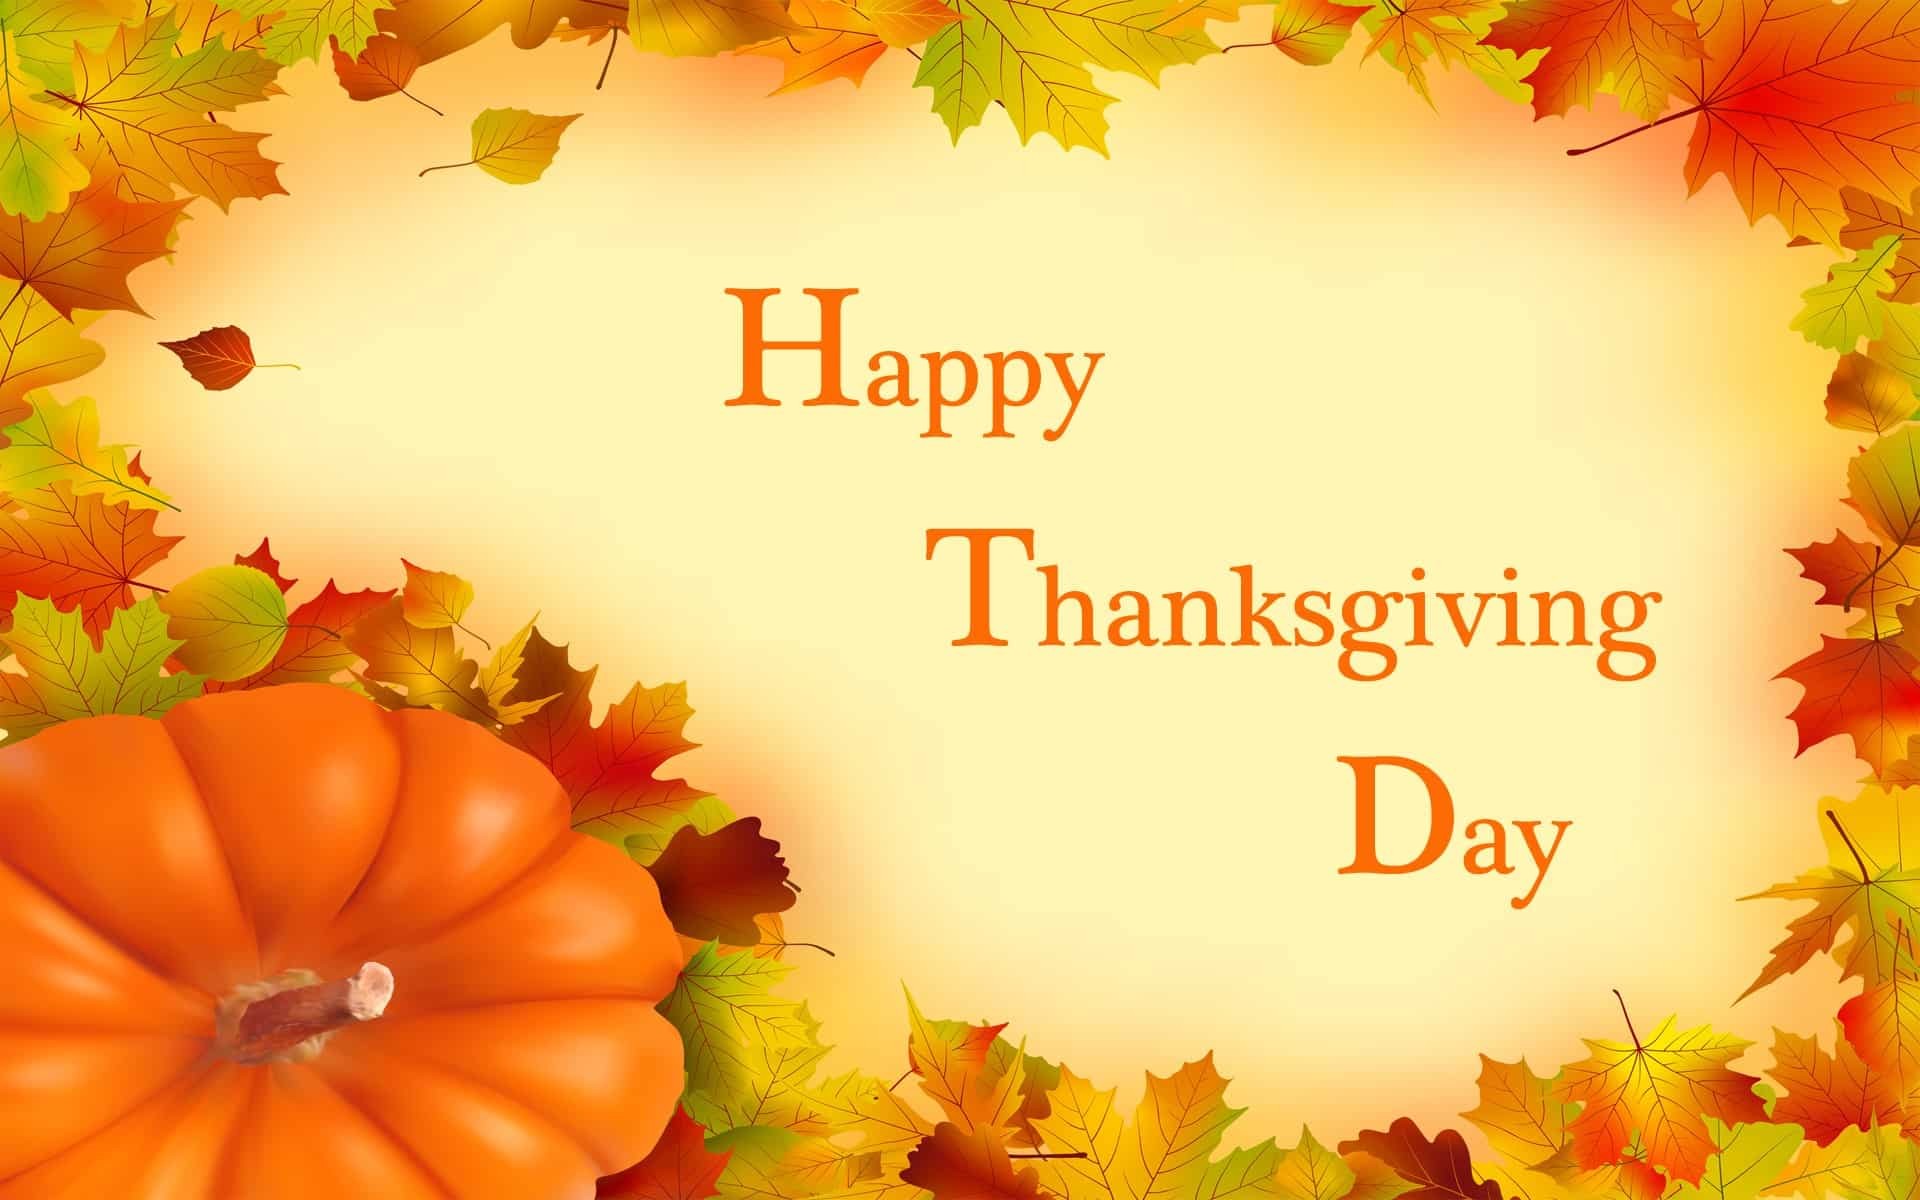 Thanksgiving 2023 Images | Happy Thanksgiving Images 2023 Photos Pictures  Pics & HD Wallpapers Free Download - Happy Thanksgiving Images 2023  Pictures Photos Wallpaper | Thanksgiving Quotes, Wishes, Messages,  Greetings Cards